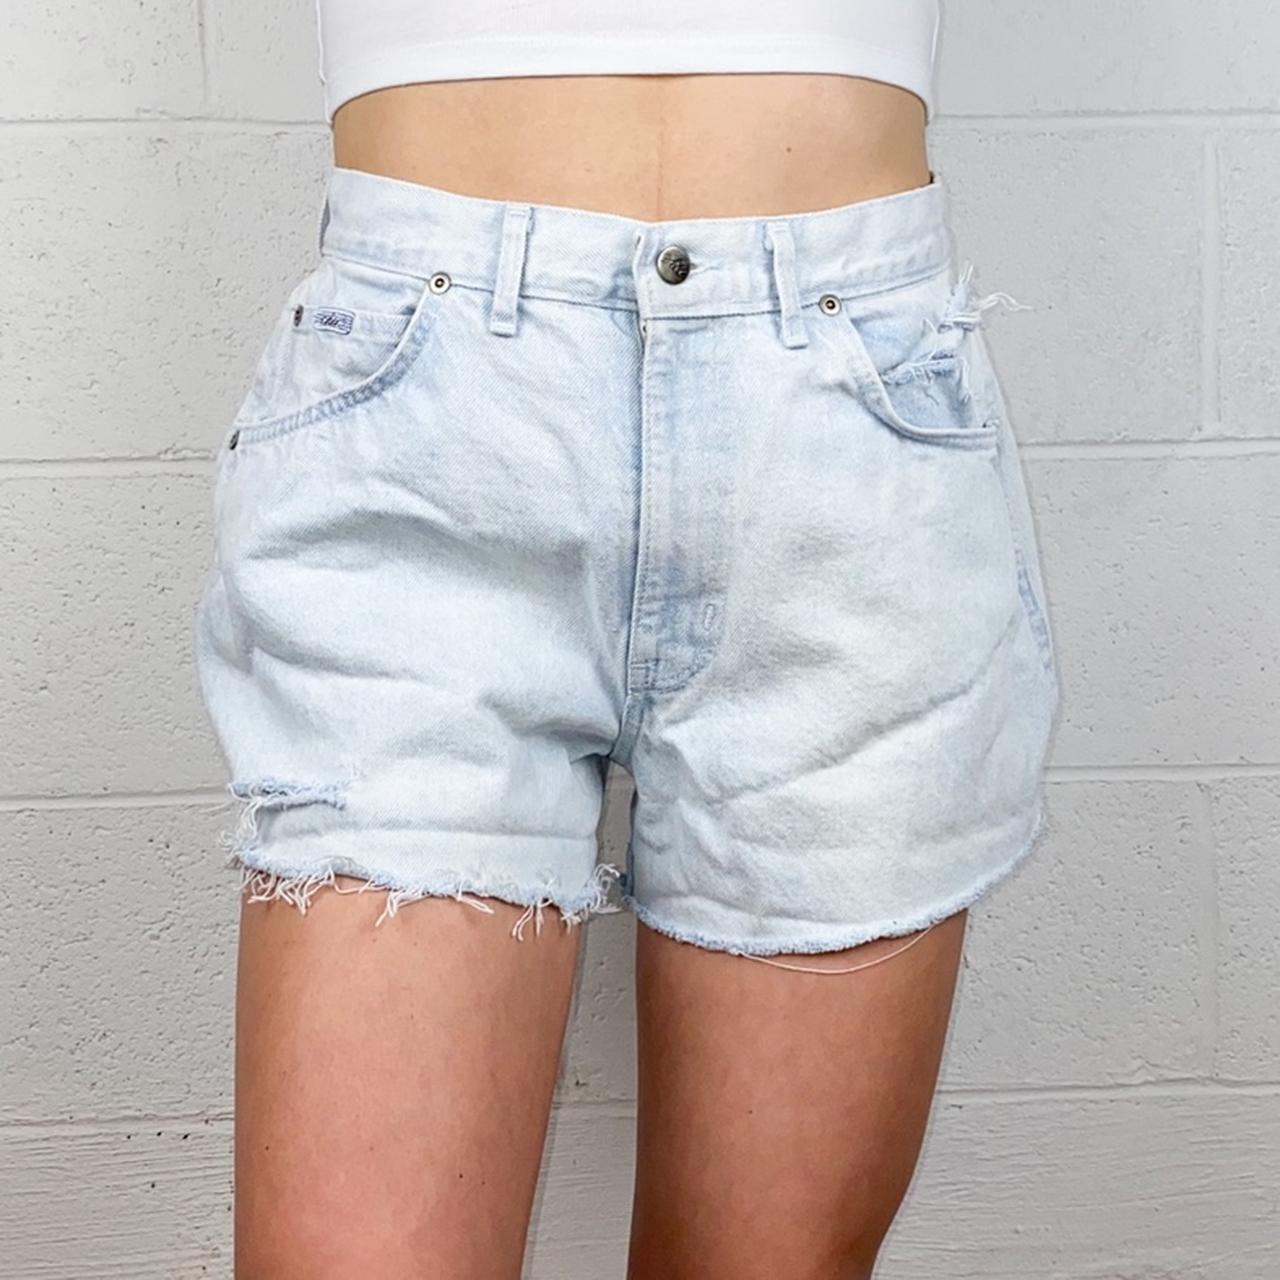 Chic Women's Blue and White Shorts